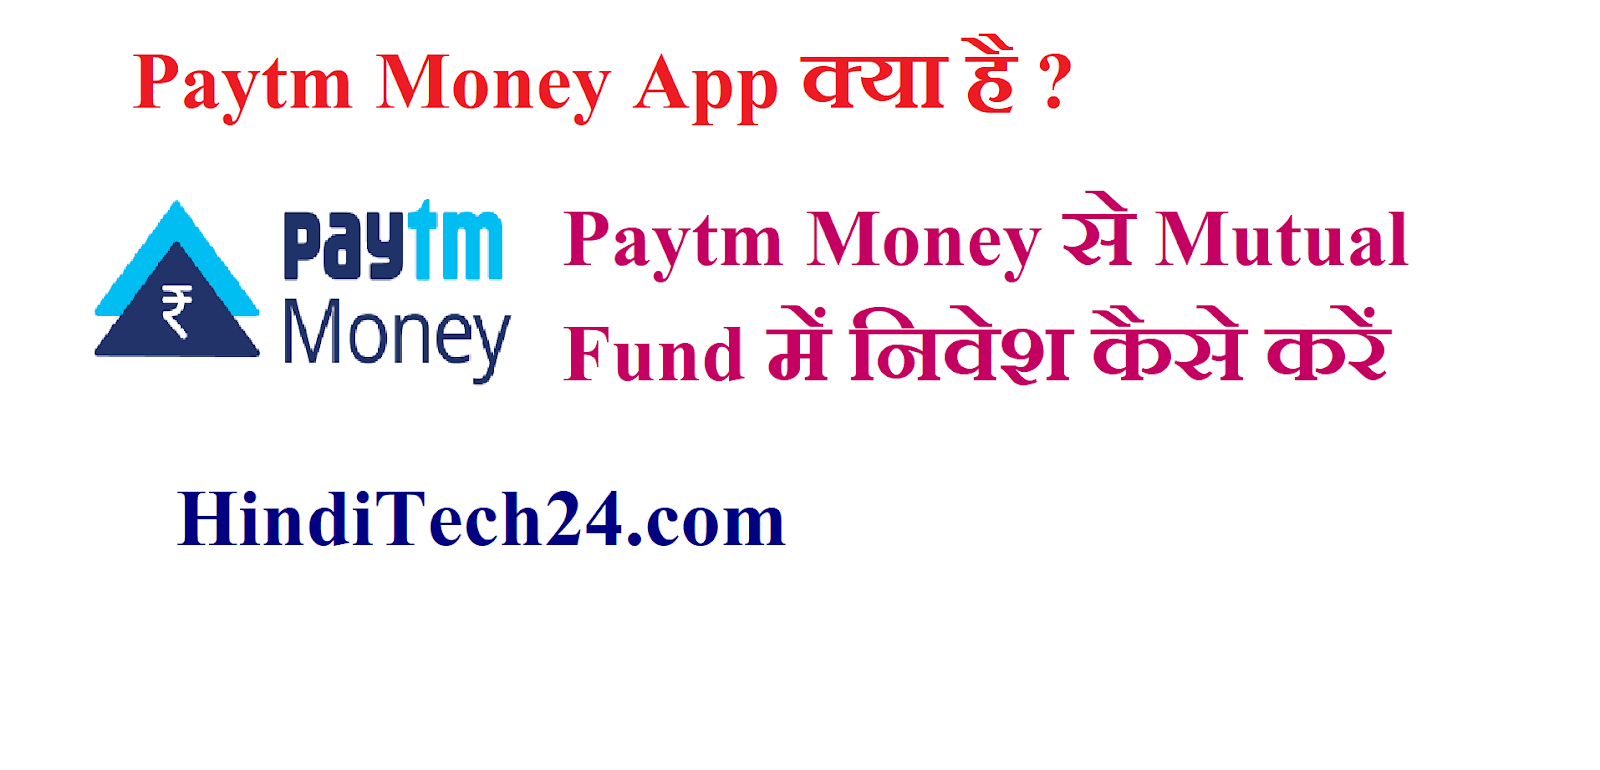 What is Paytm Money App in hindi.